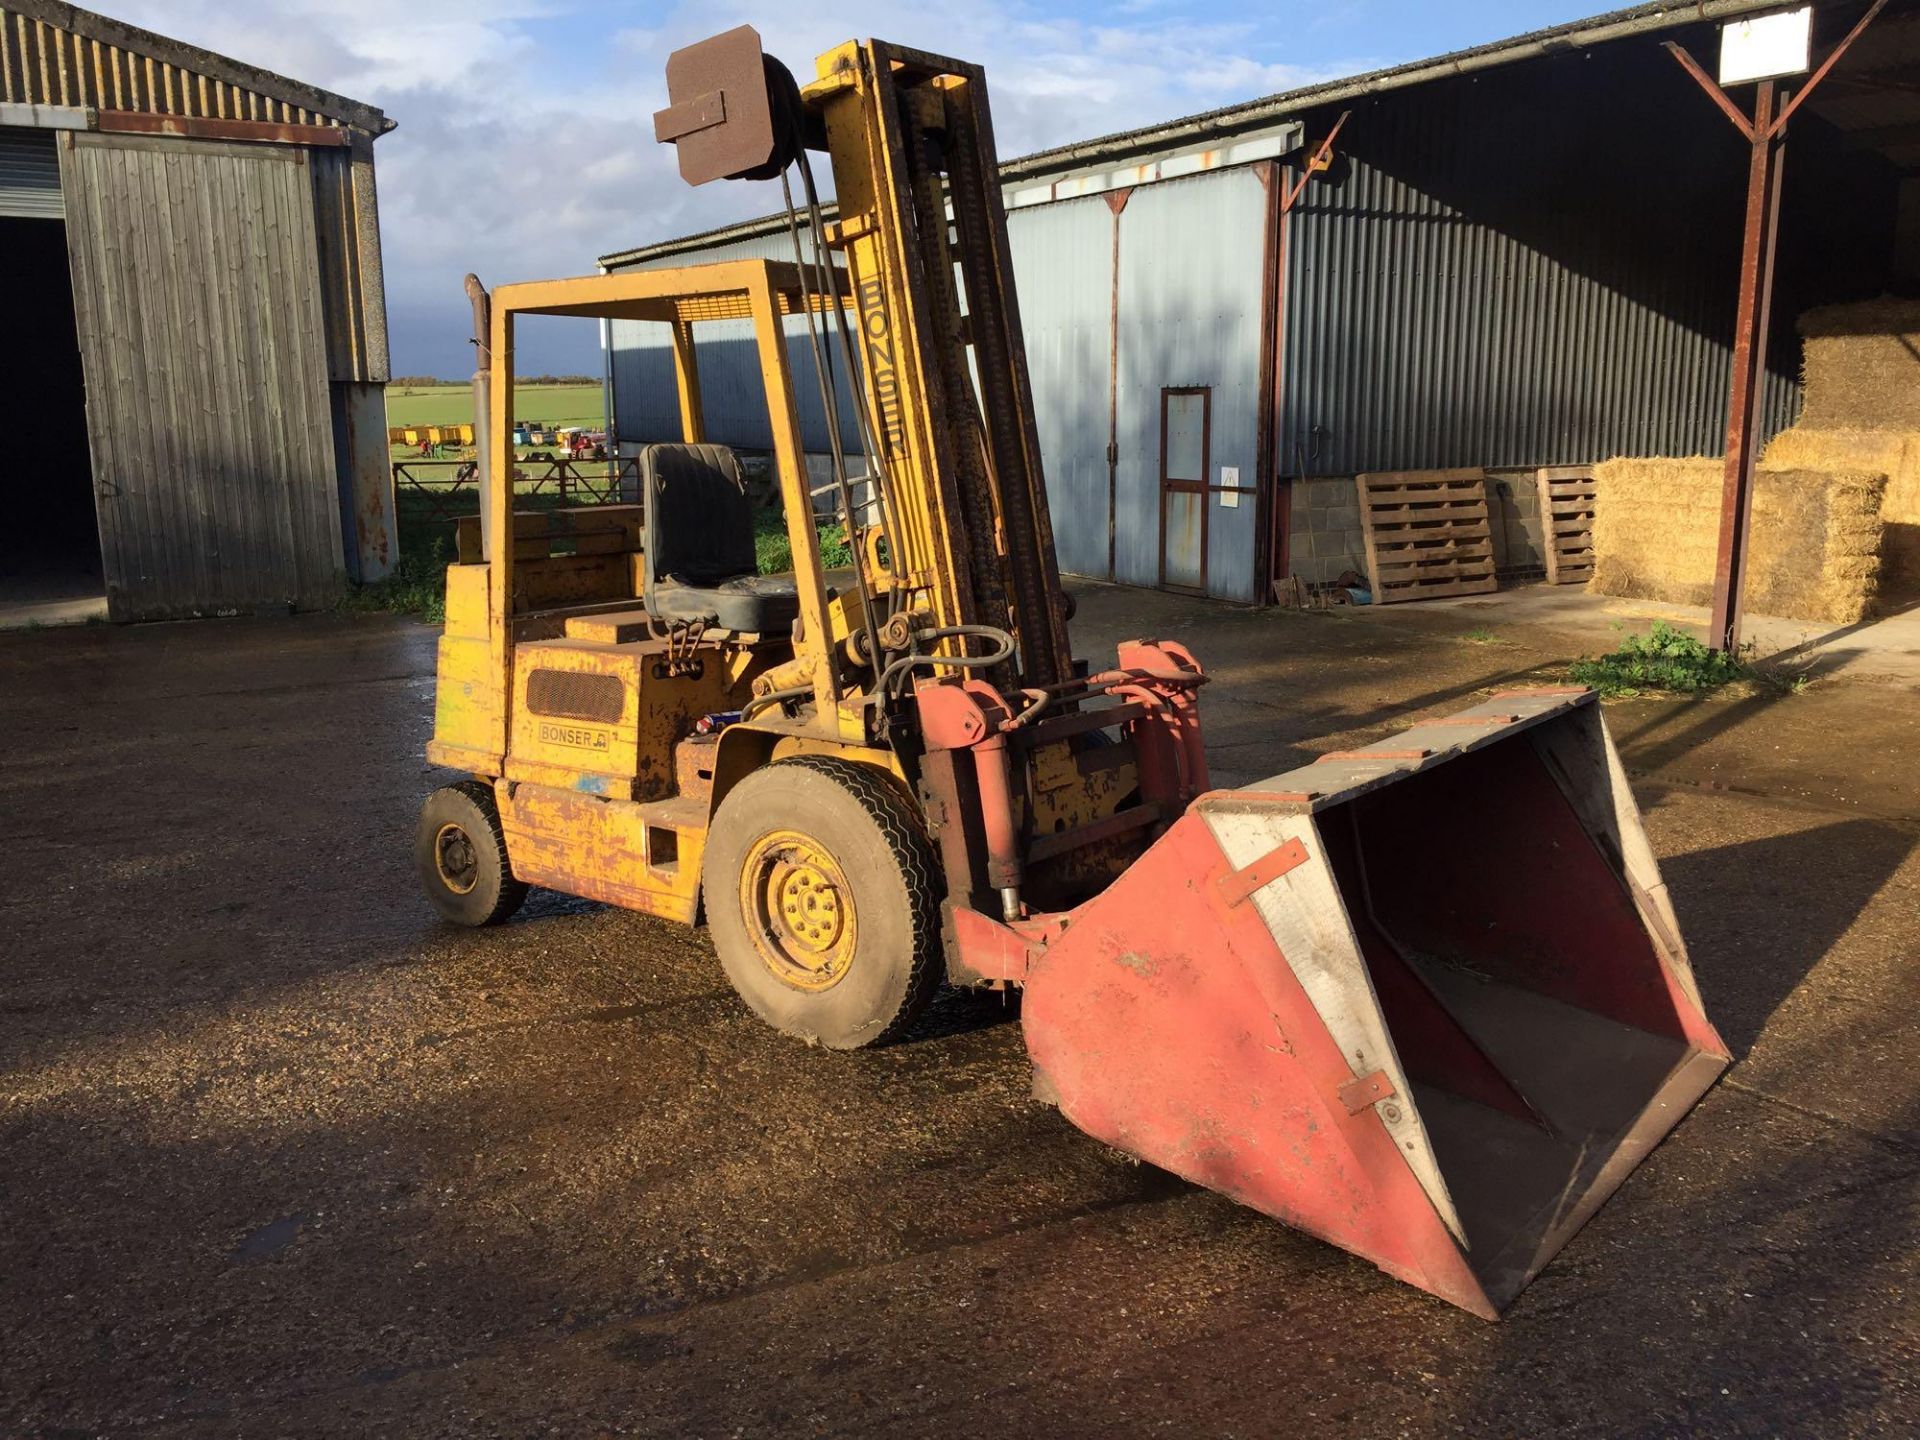 1975 Bonser masted forklift with grain bucket and pallet tines. Reg No: KFE 257N. Hours: 14,892